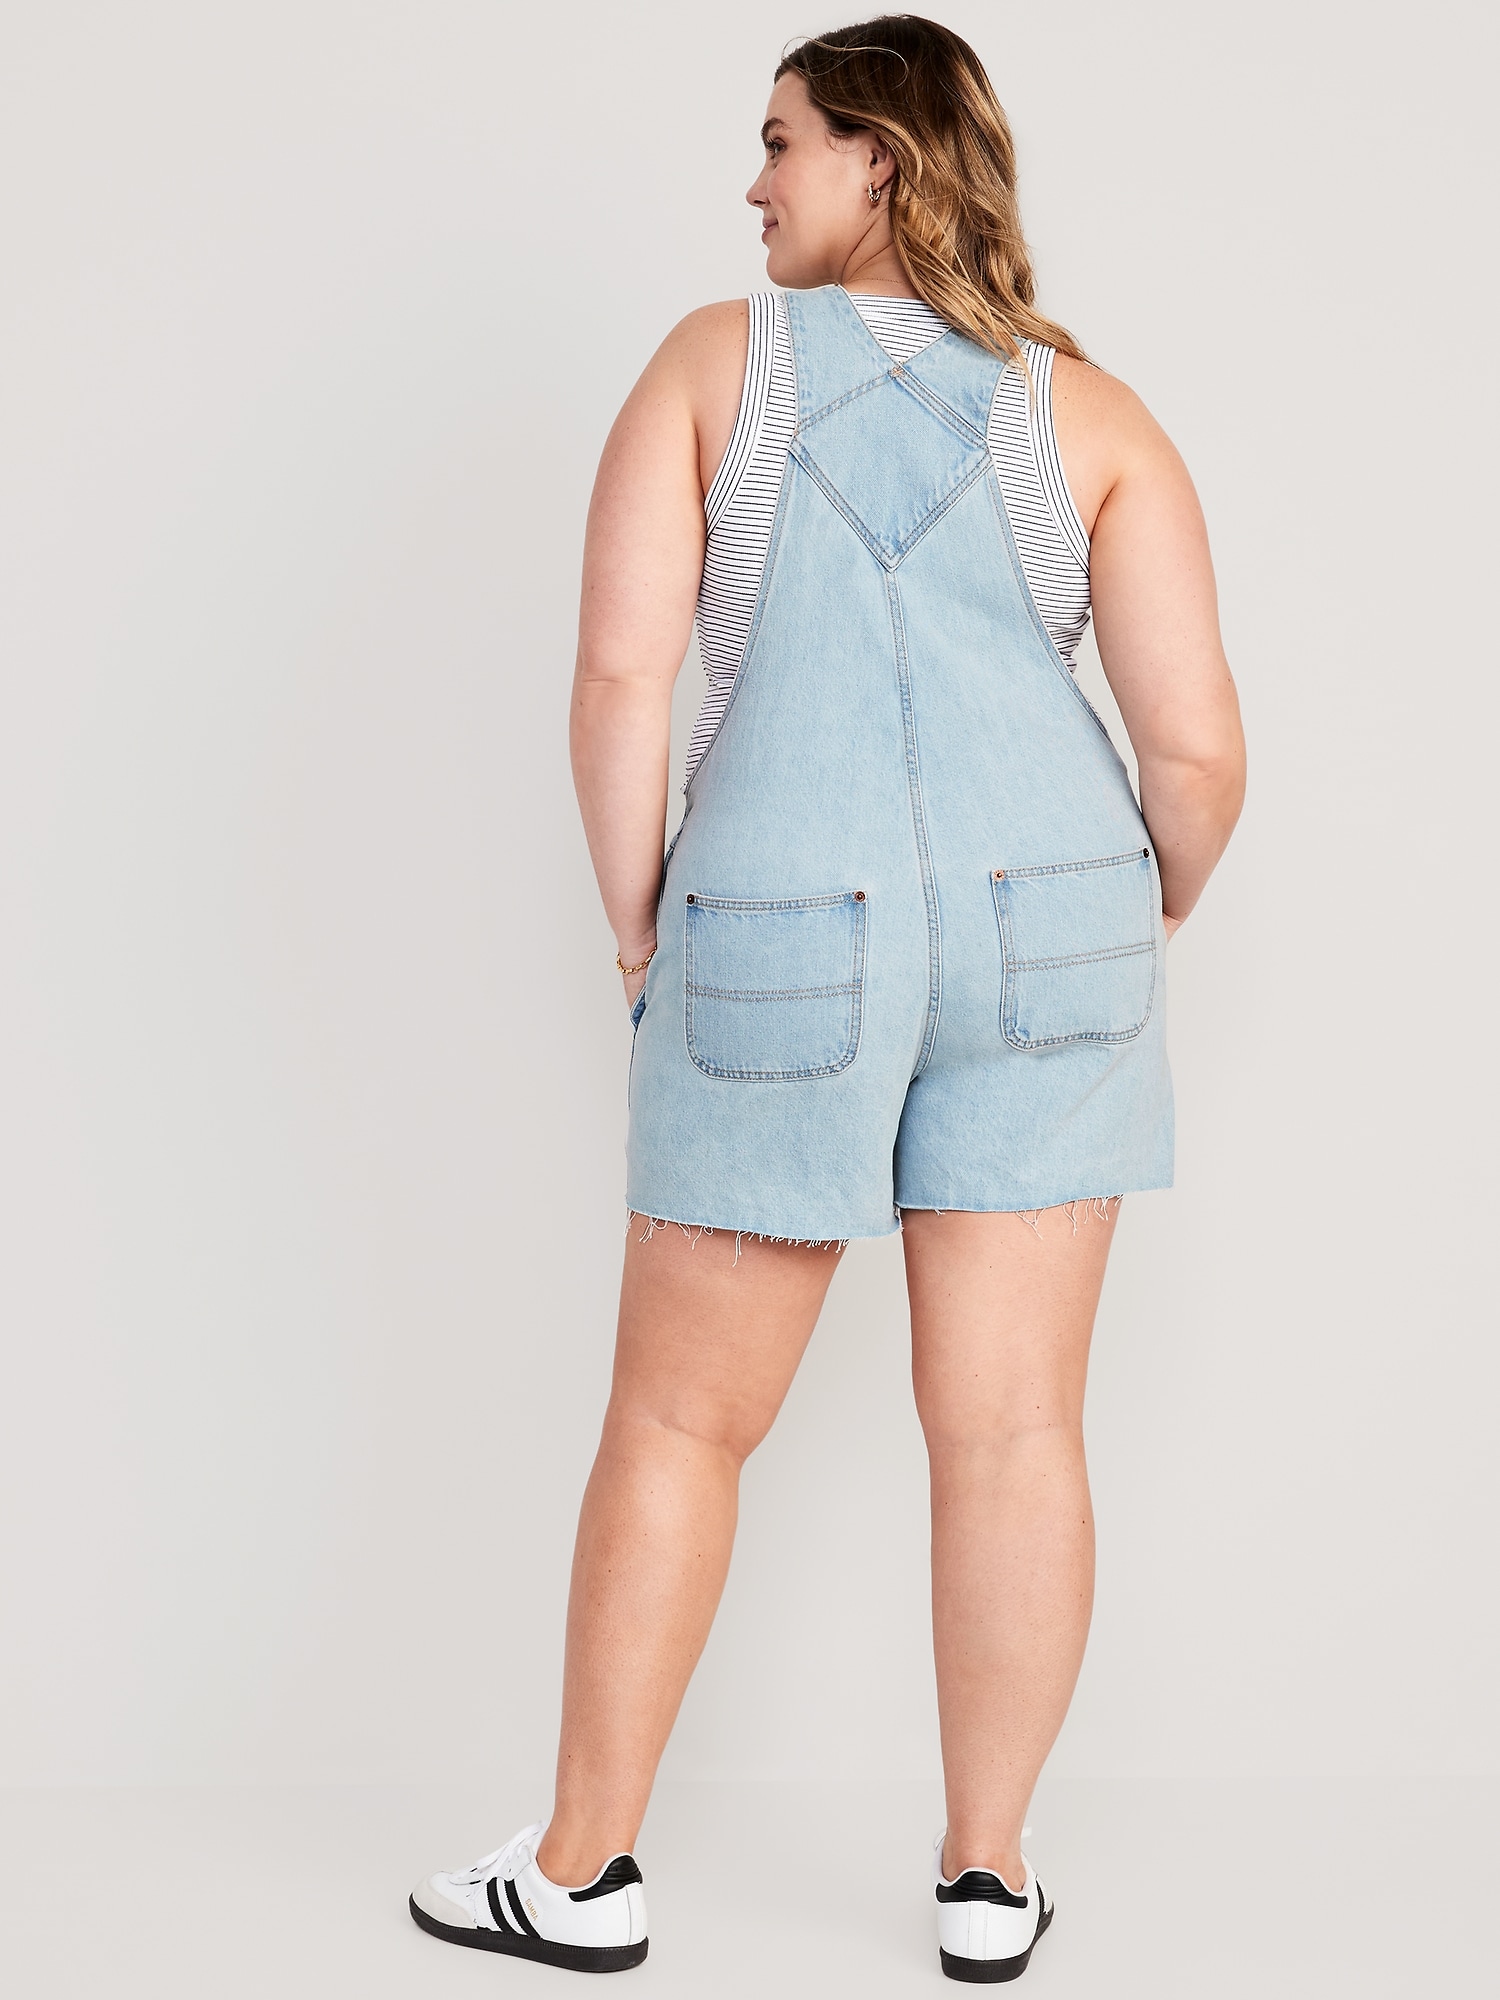 overall jean shorts for women